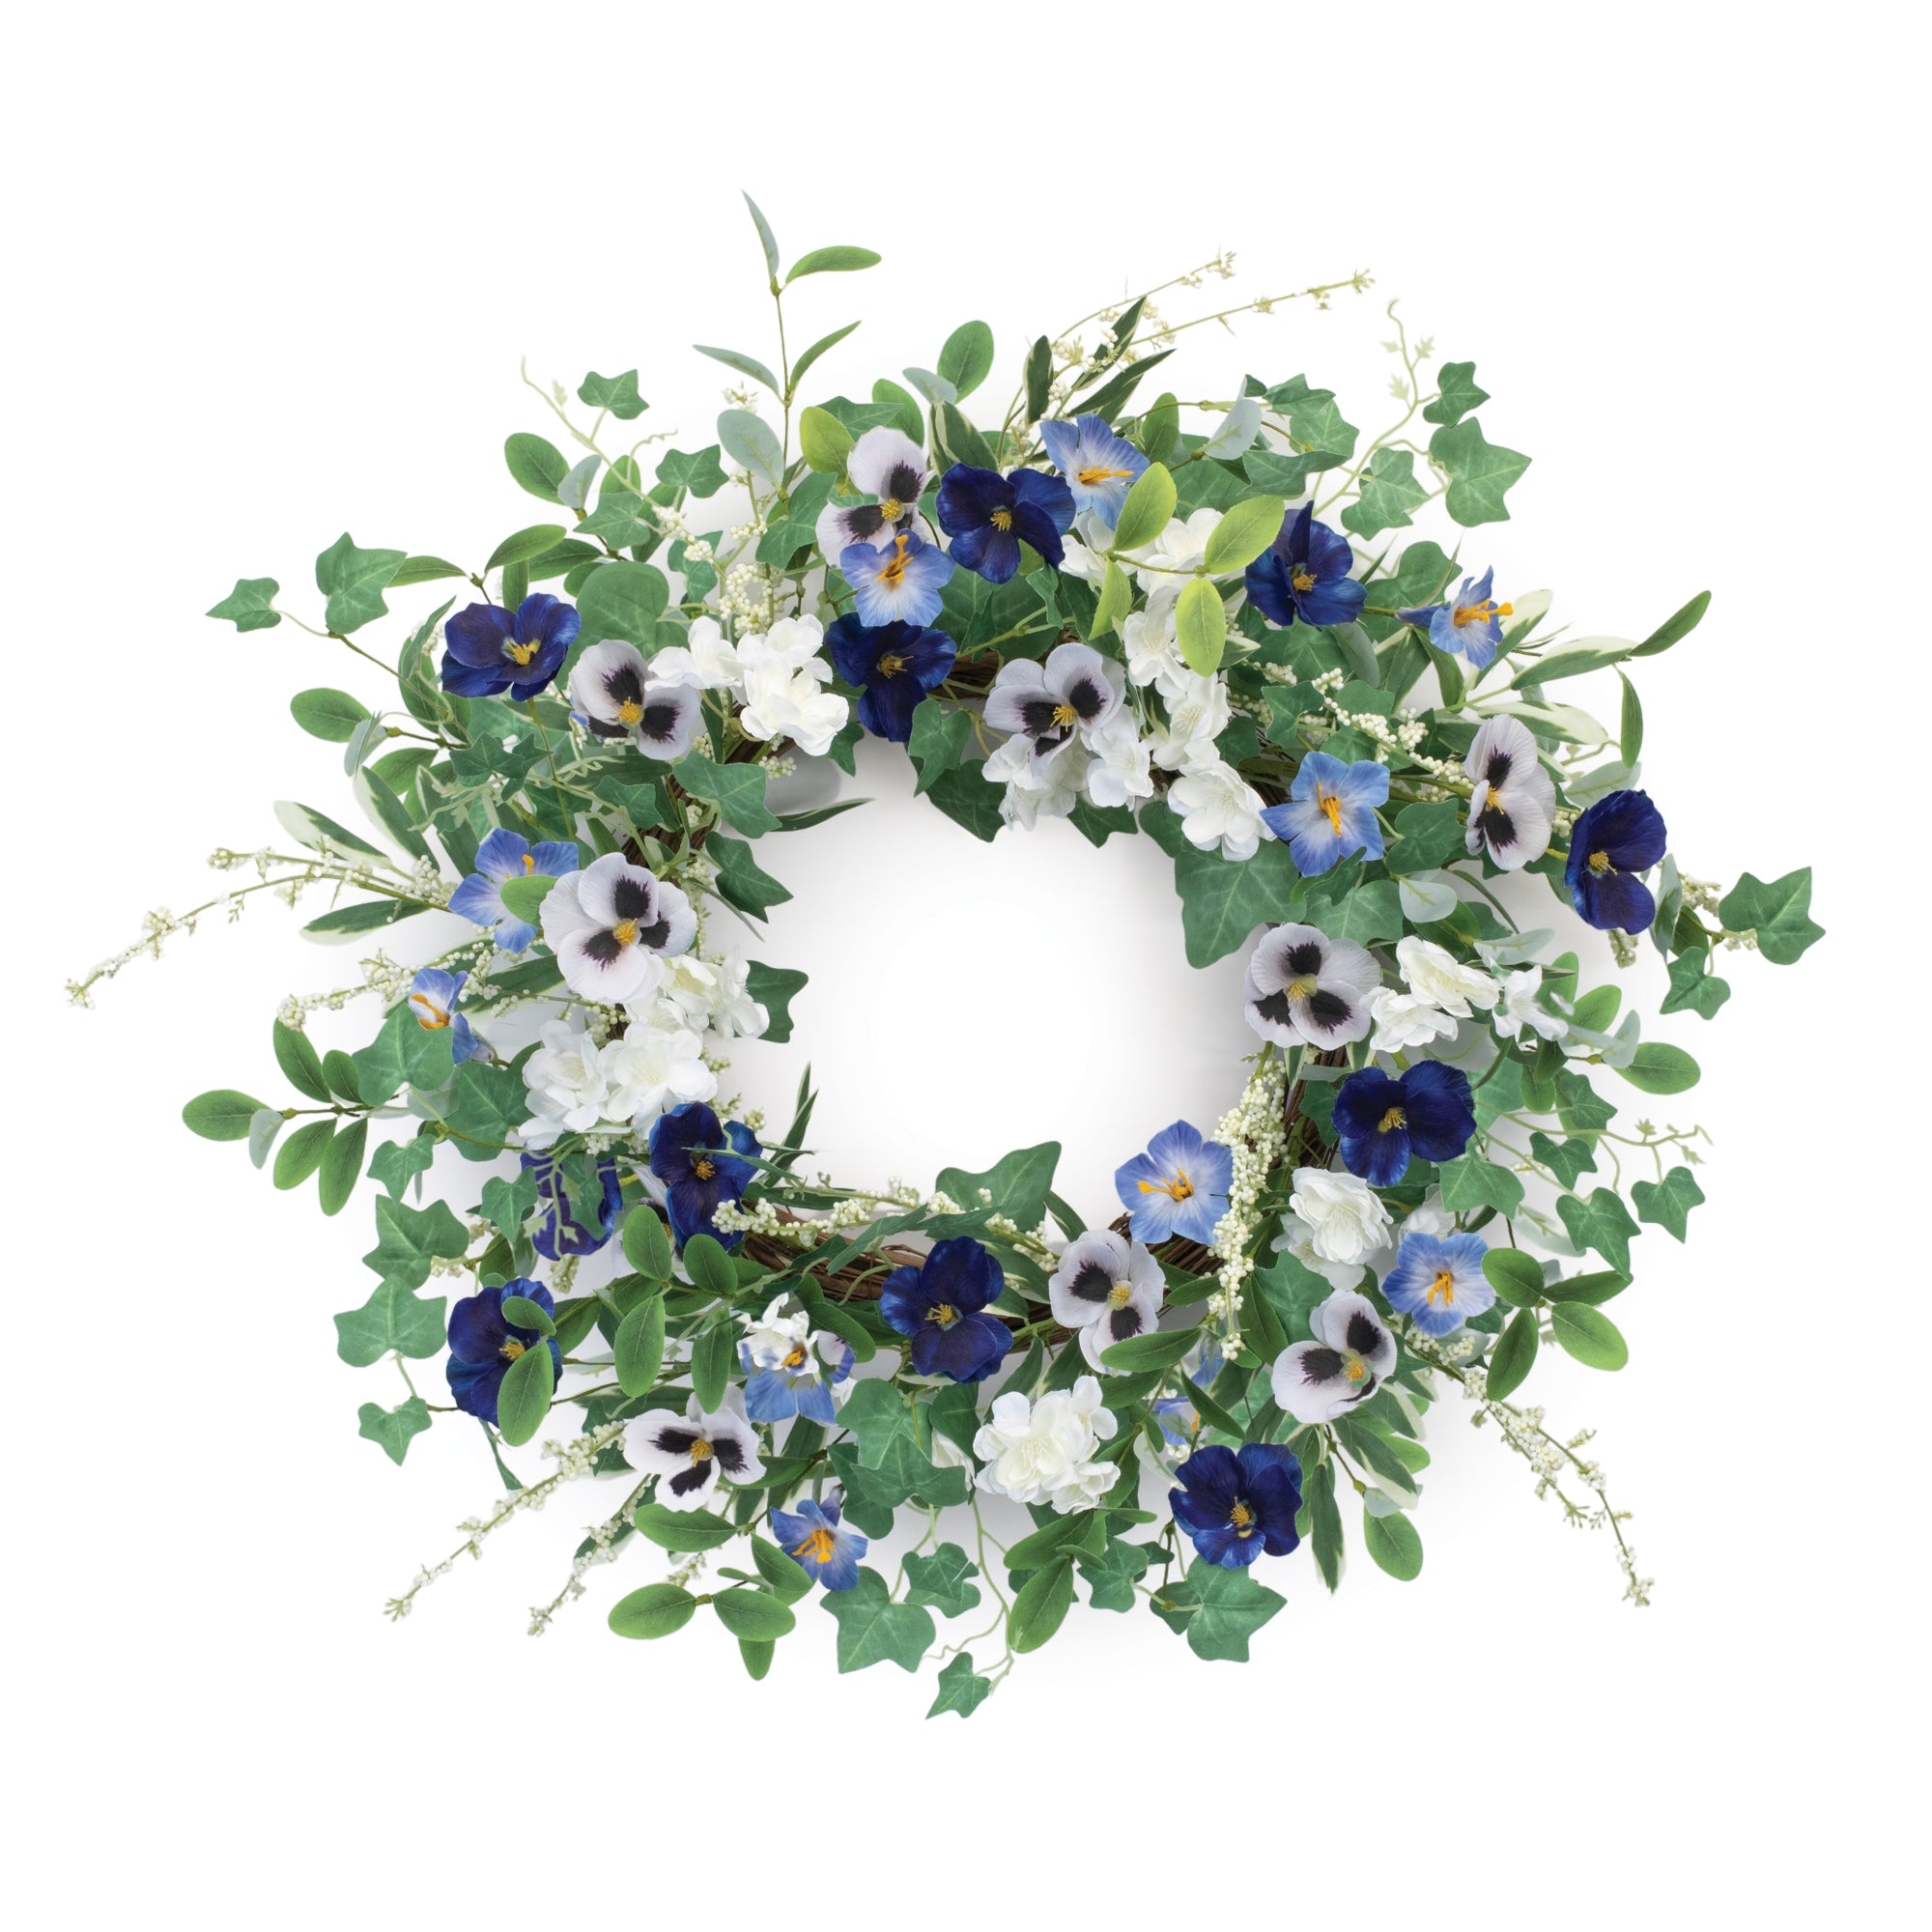 Mixed Petunia Pansy Floral Wreath 22"D